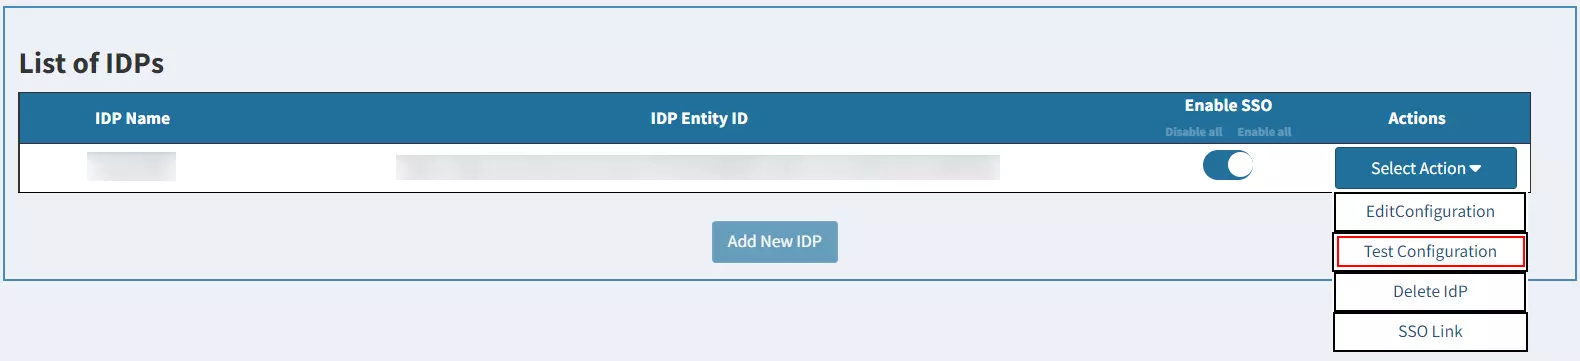 nopCommerce Single Sign-On (SSO) using WordPress as IDP - Click on Test Configuration